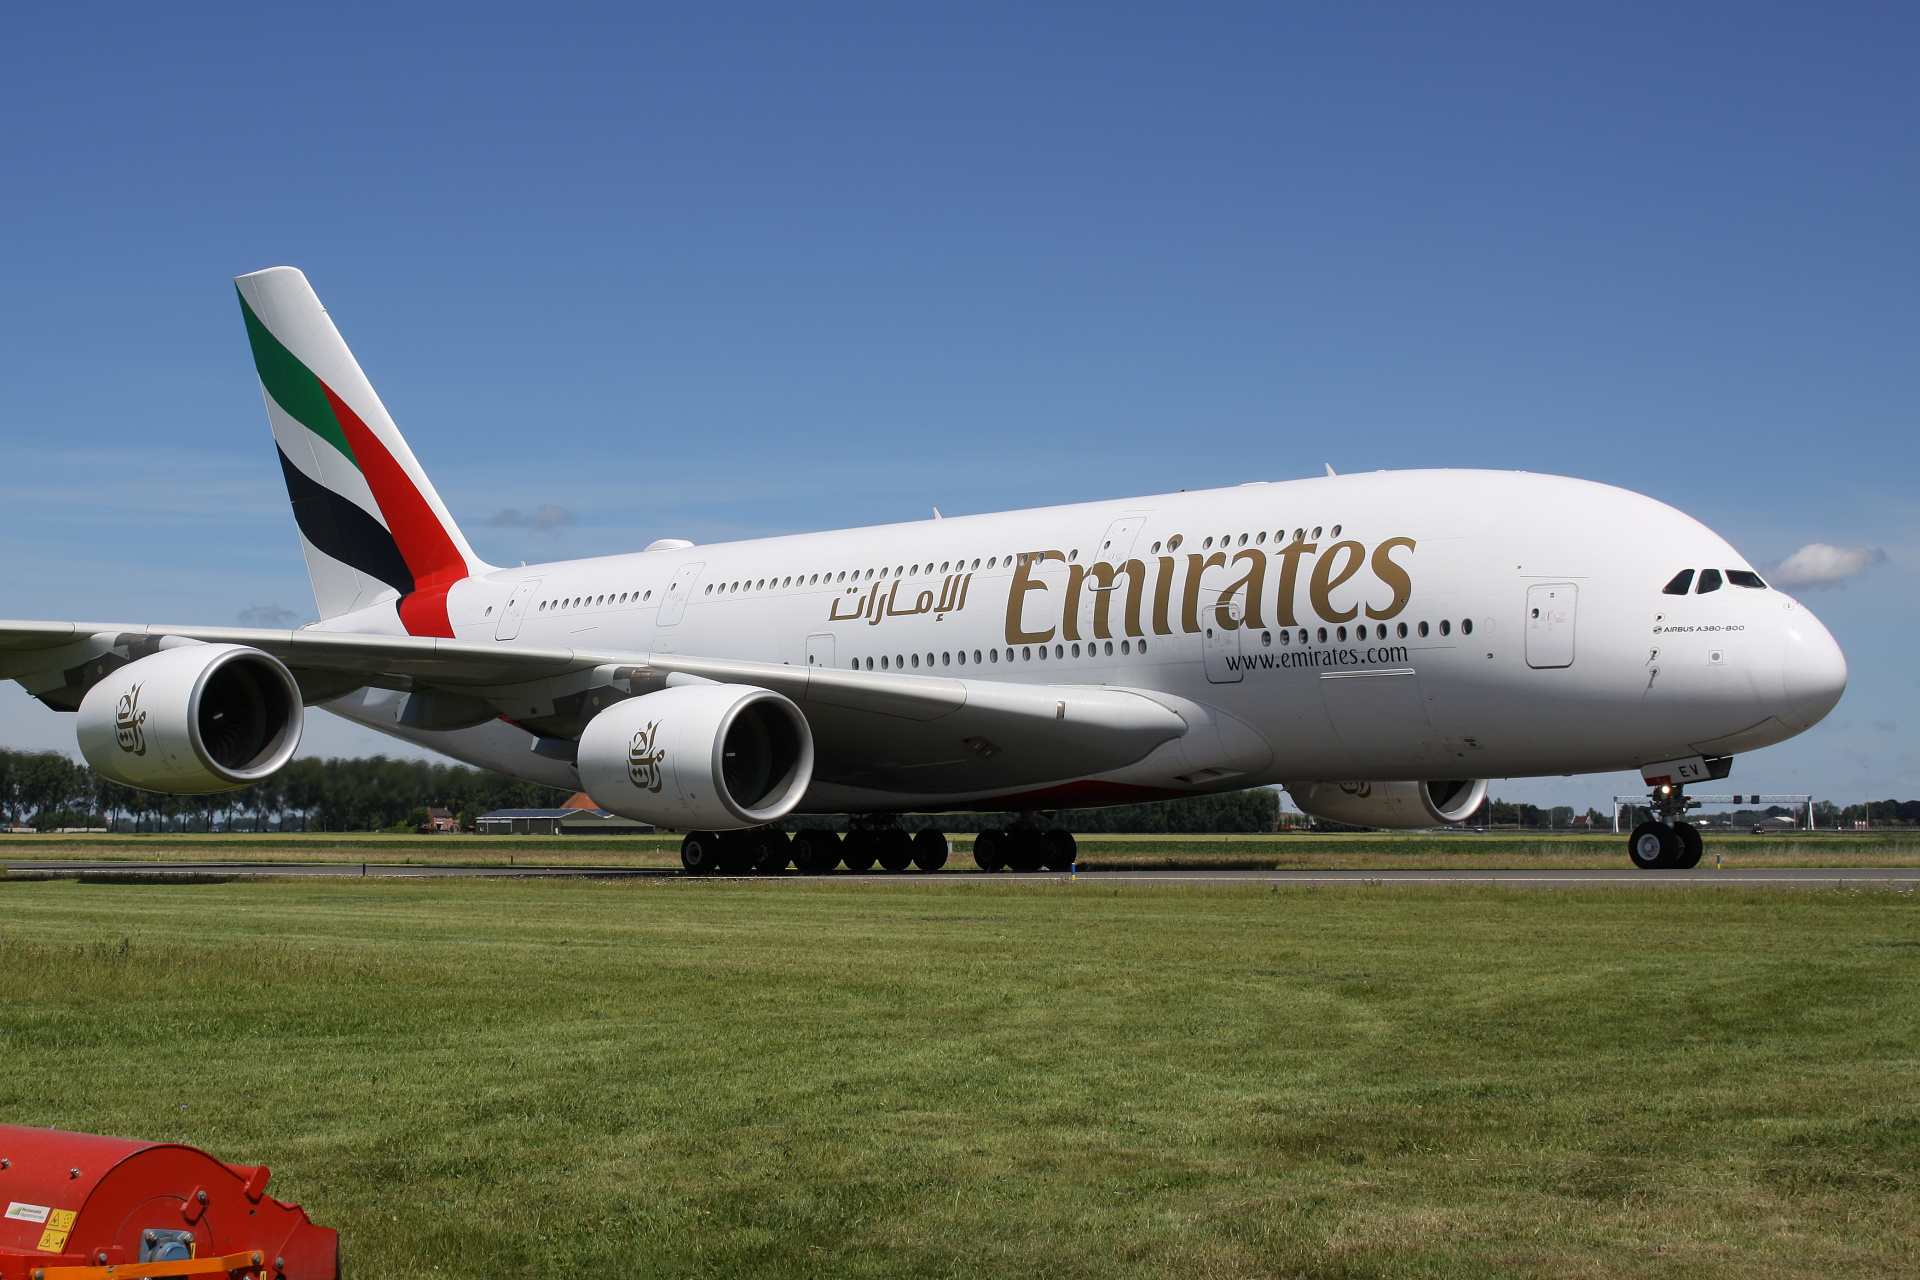 A6-EEV (Aircraft » Schiphol Spotting » Airbus A380-800 » Emirates)